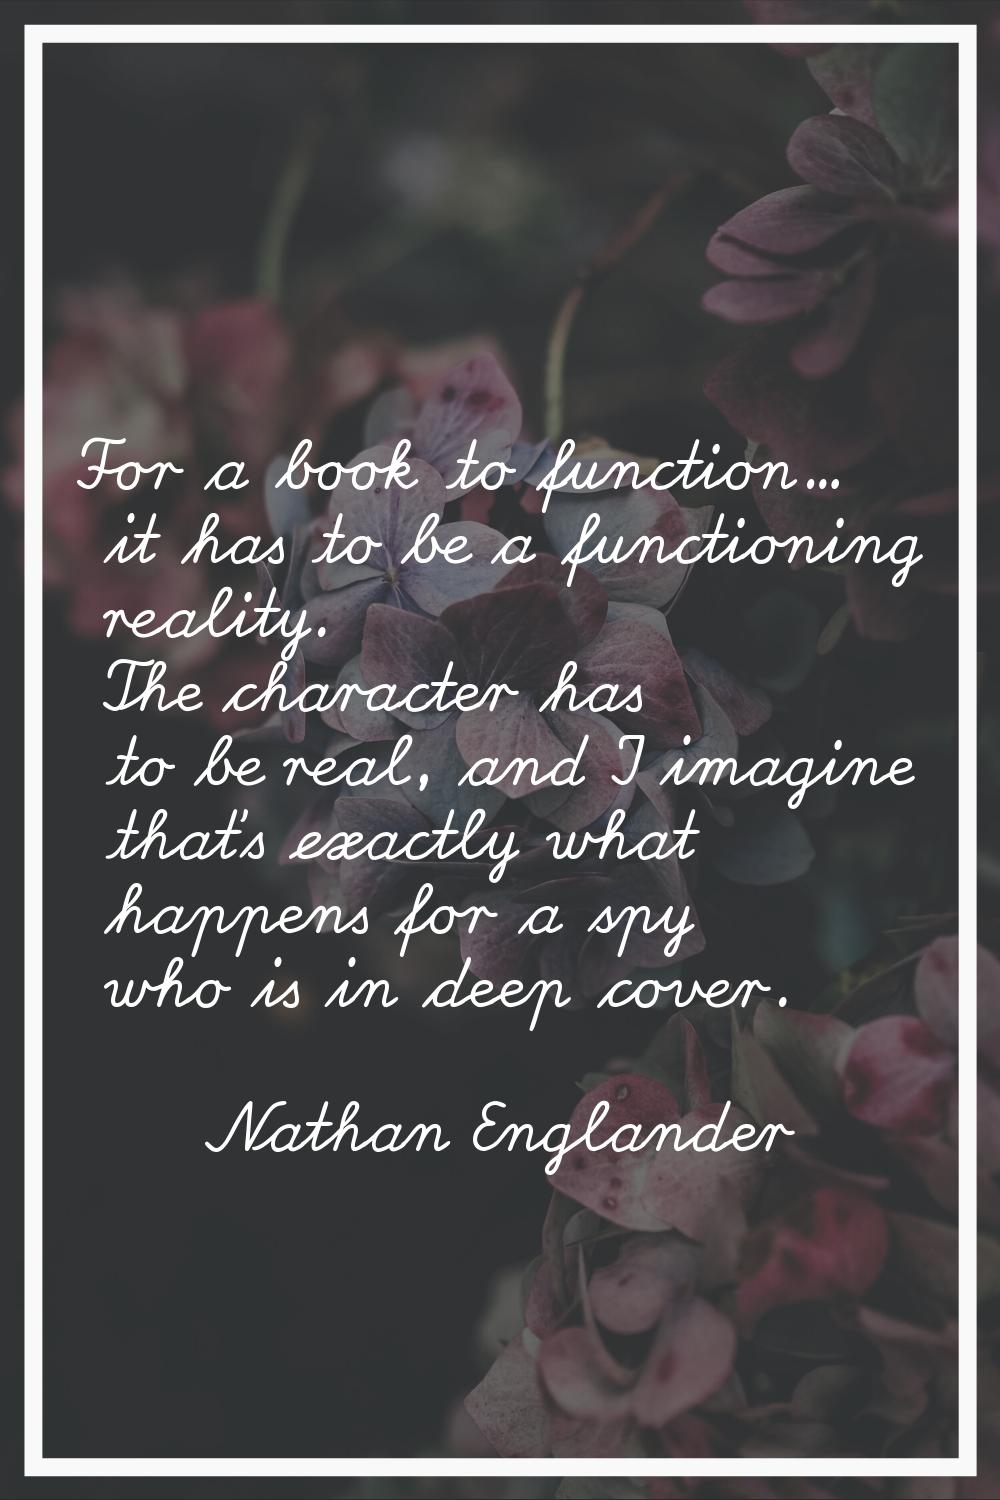 For a book to function... it has to be a functioning reality. The character has to be real, and I i